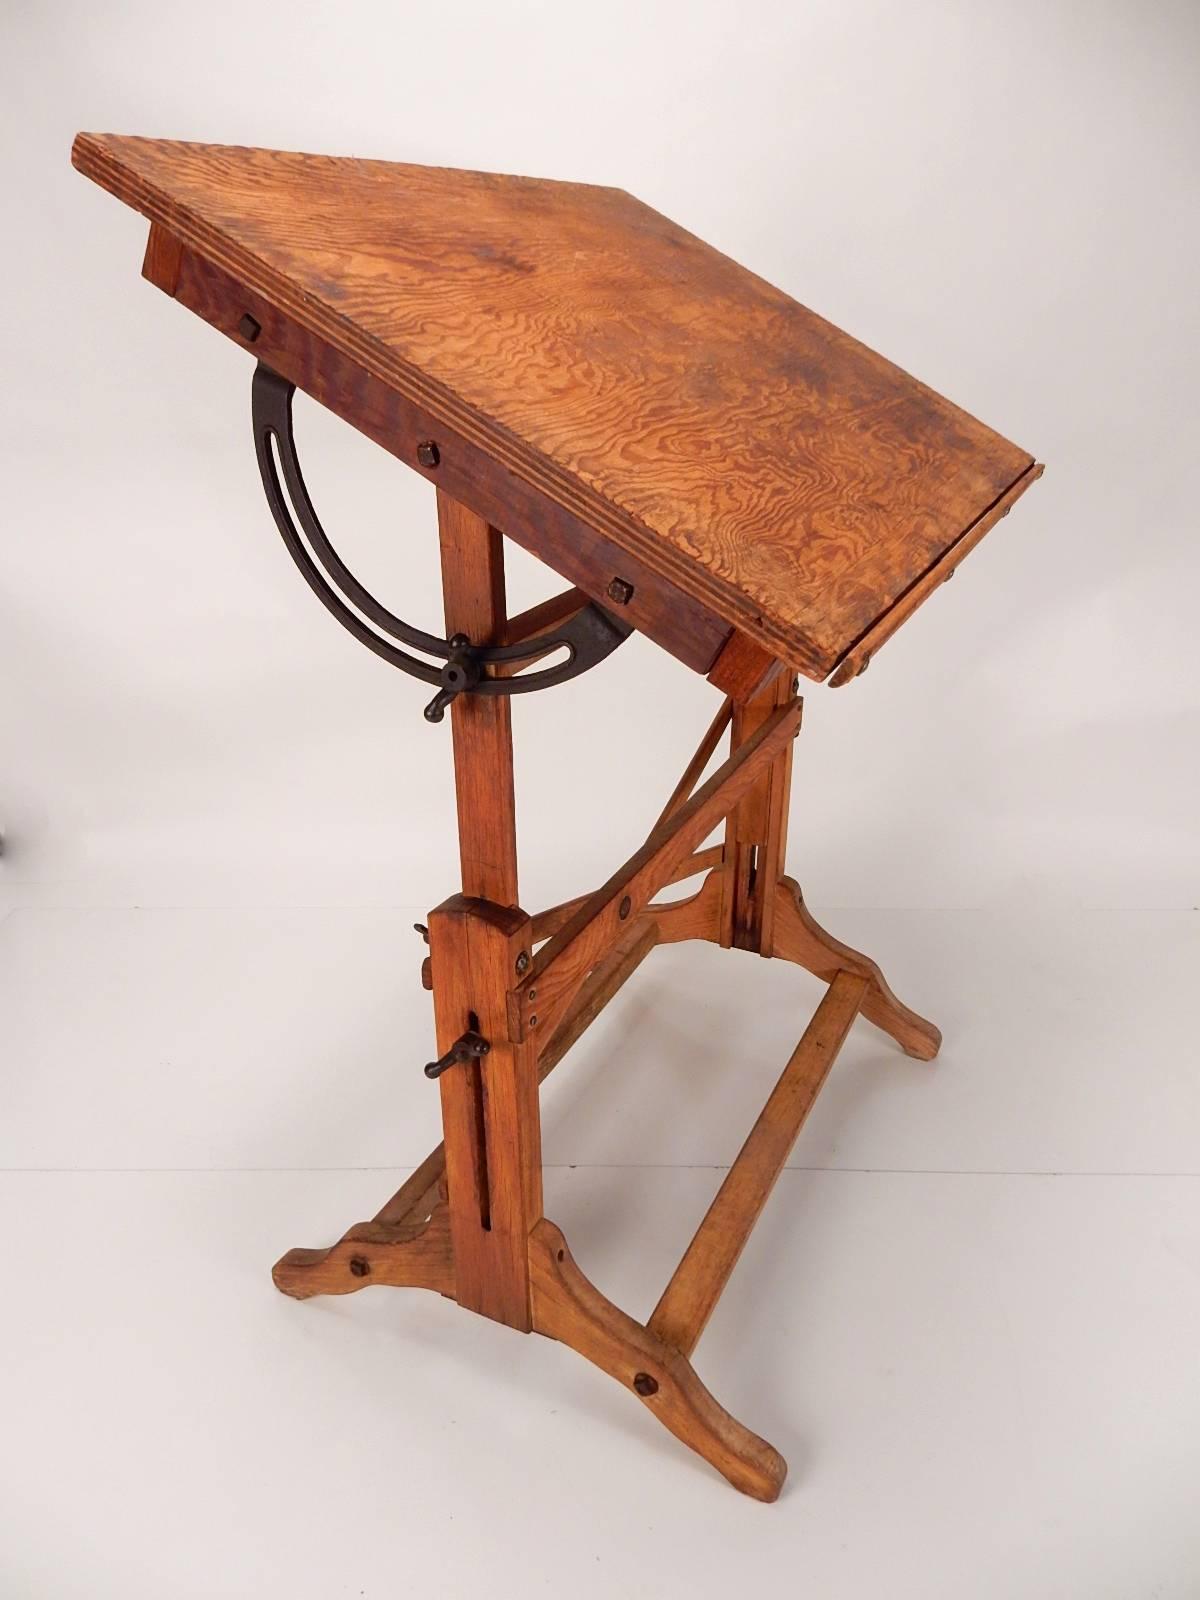 Small-scale drafting table by Post Drafting Materials,
circa 1930s. Completely original and un-restored.
Every adjustment works smooth and easy.